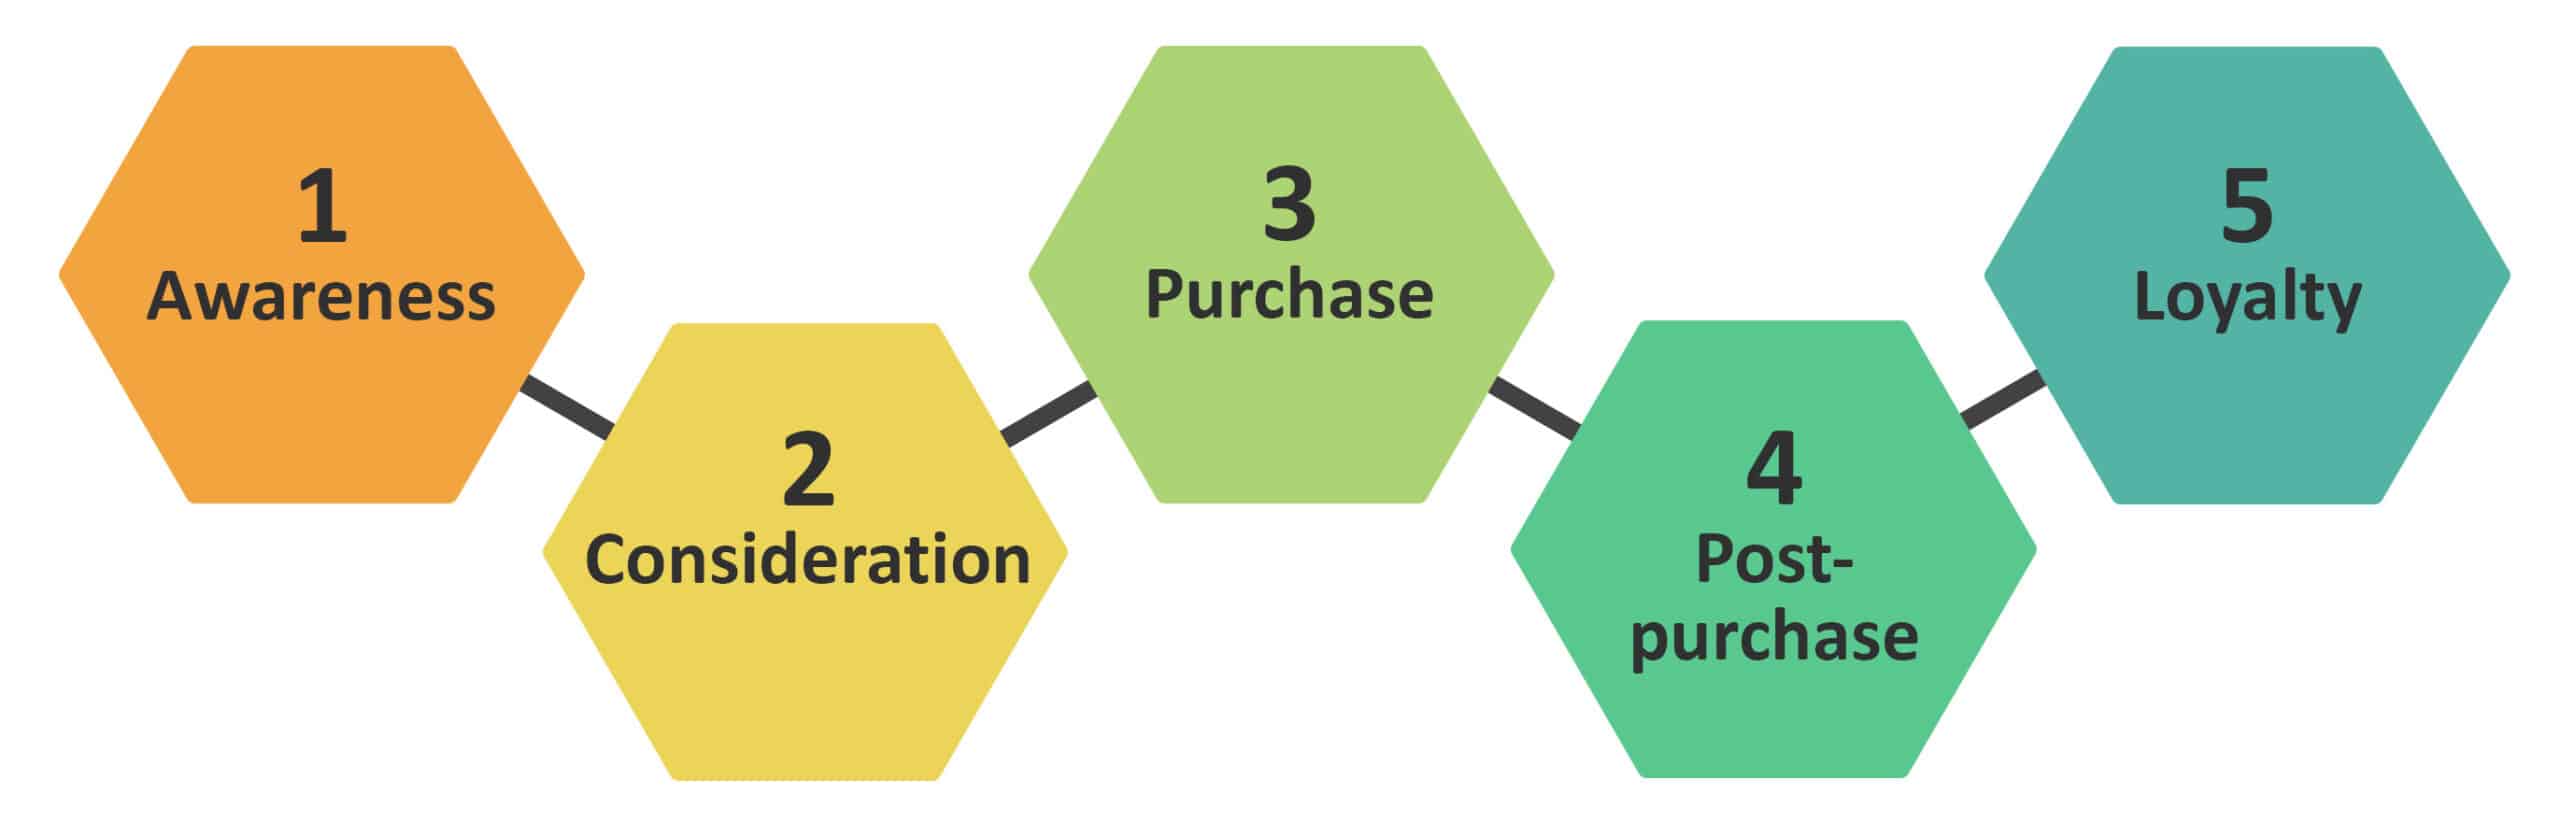 The 5 stages of the customer journey by CX by Design